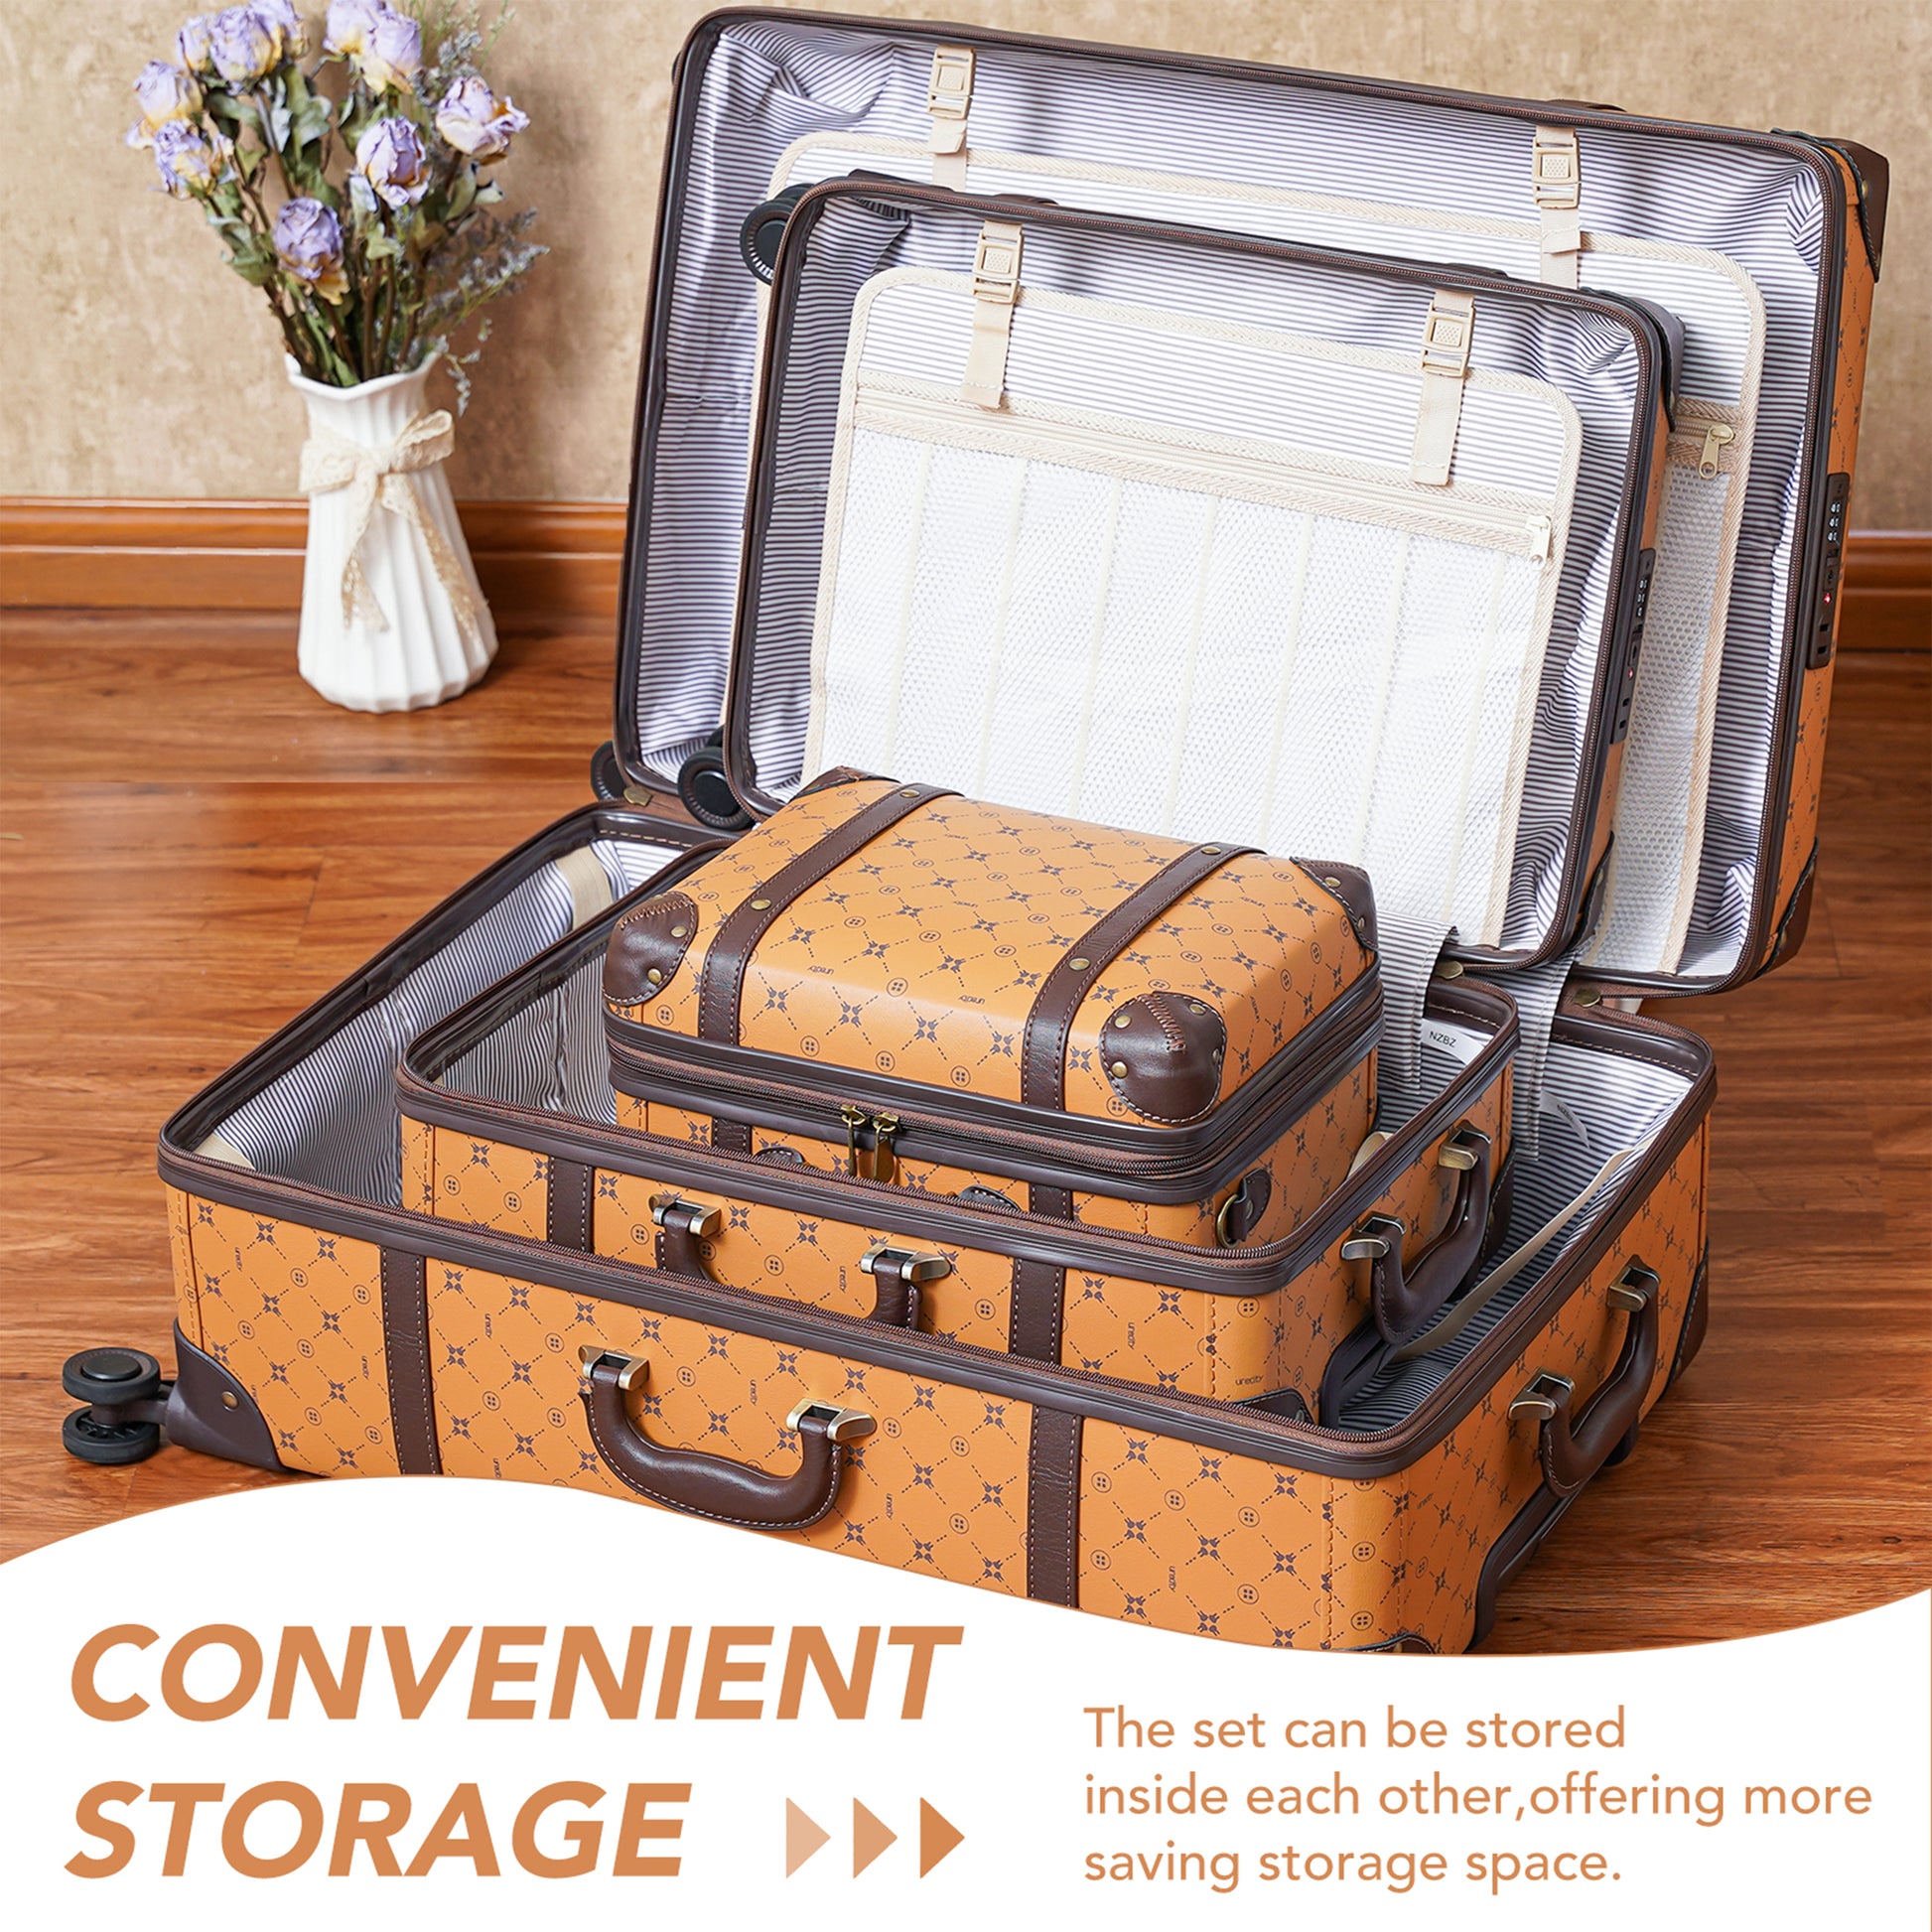 NZBZ Vintage Luggage Sets Retro Suitcase Trunk Luggage With TSA Lock 3  Pieces (Knight Gold, 14inch & 20inch & 28inch)